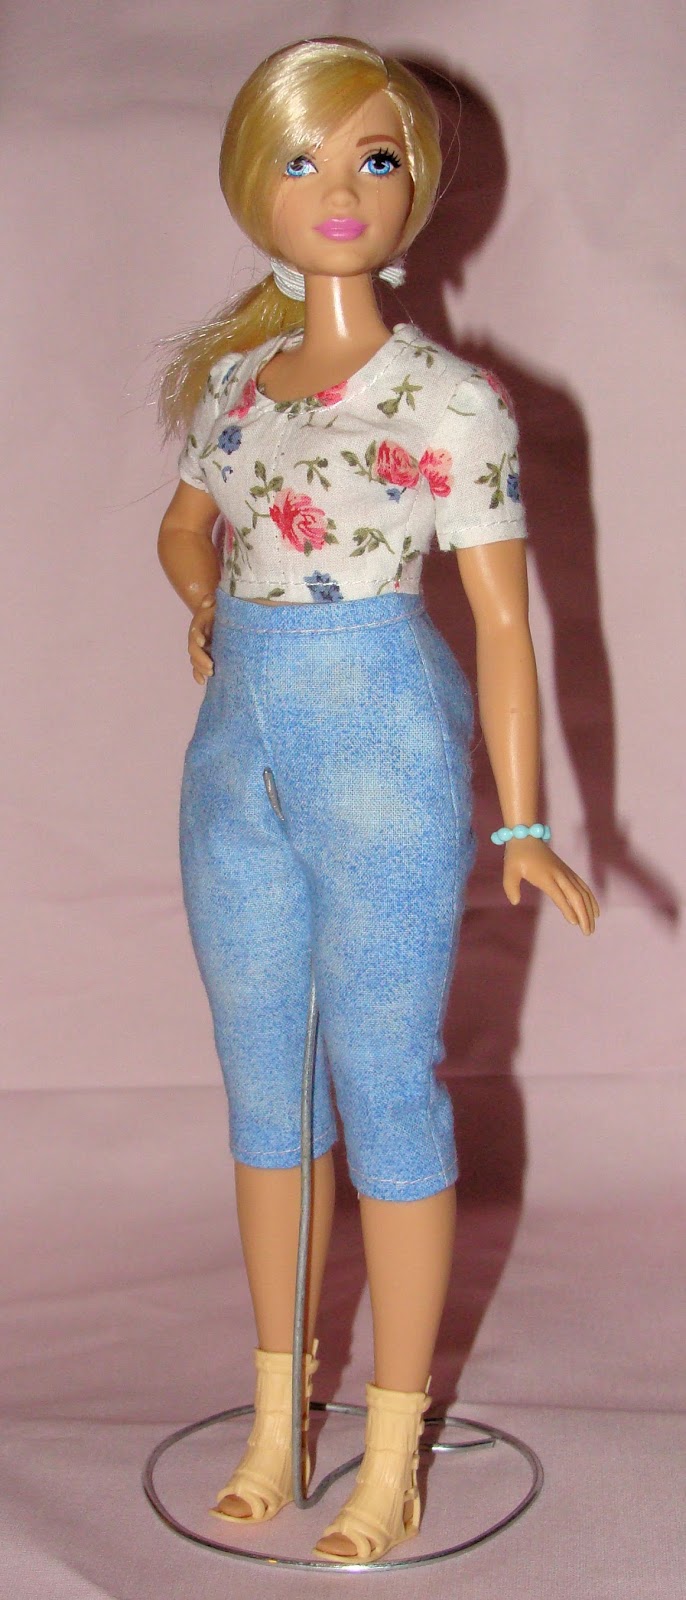 crazy-for-dollies-free-patterns-for-curvy-barbie